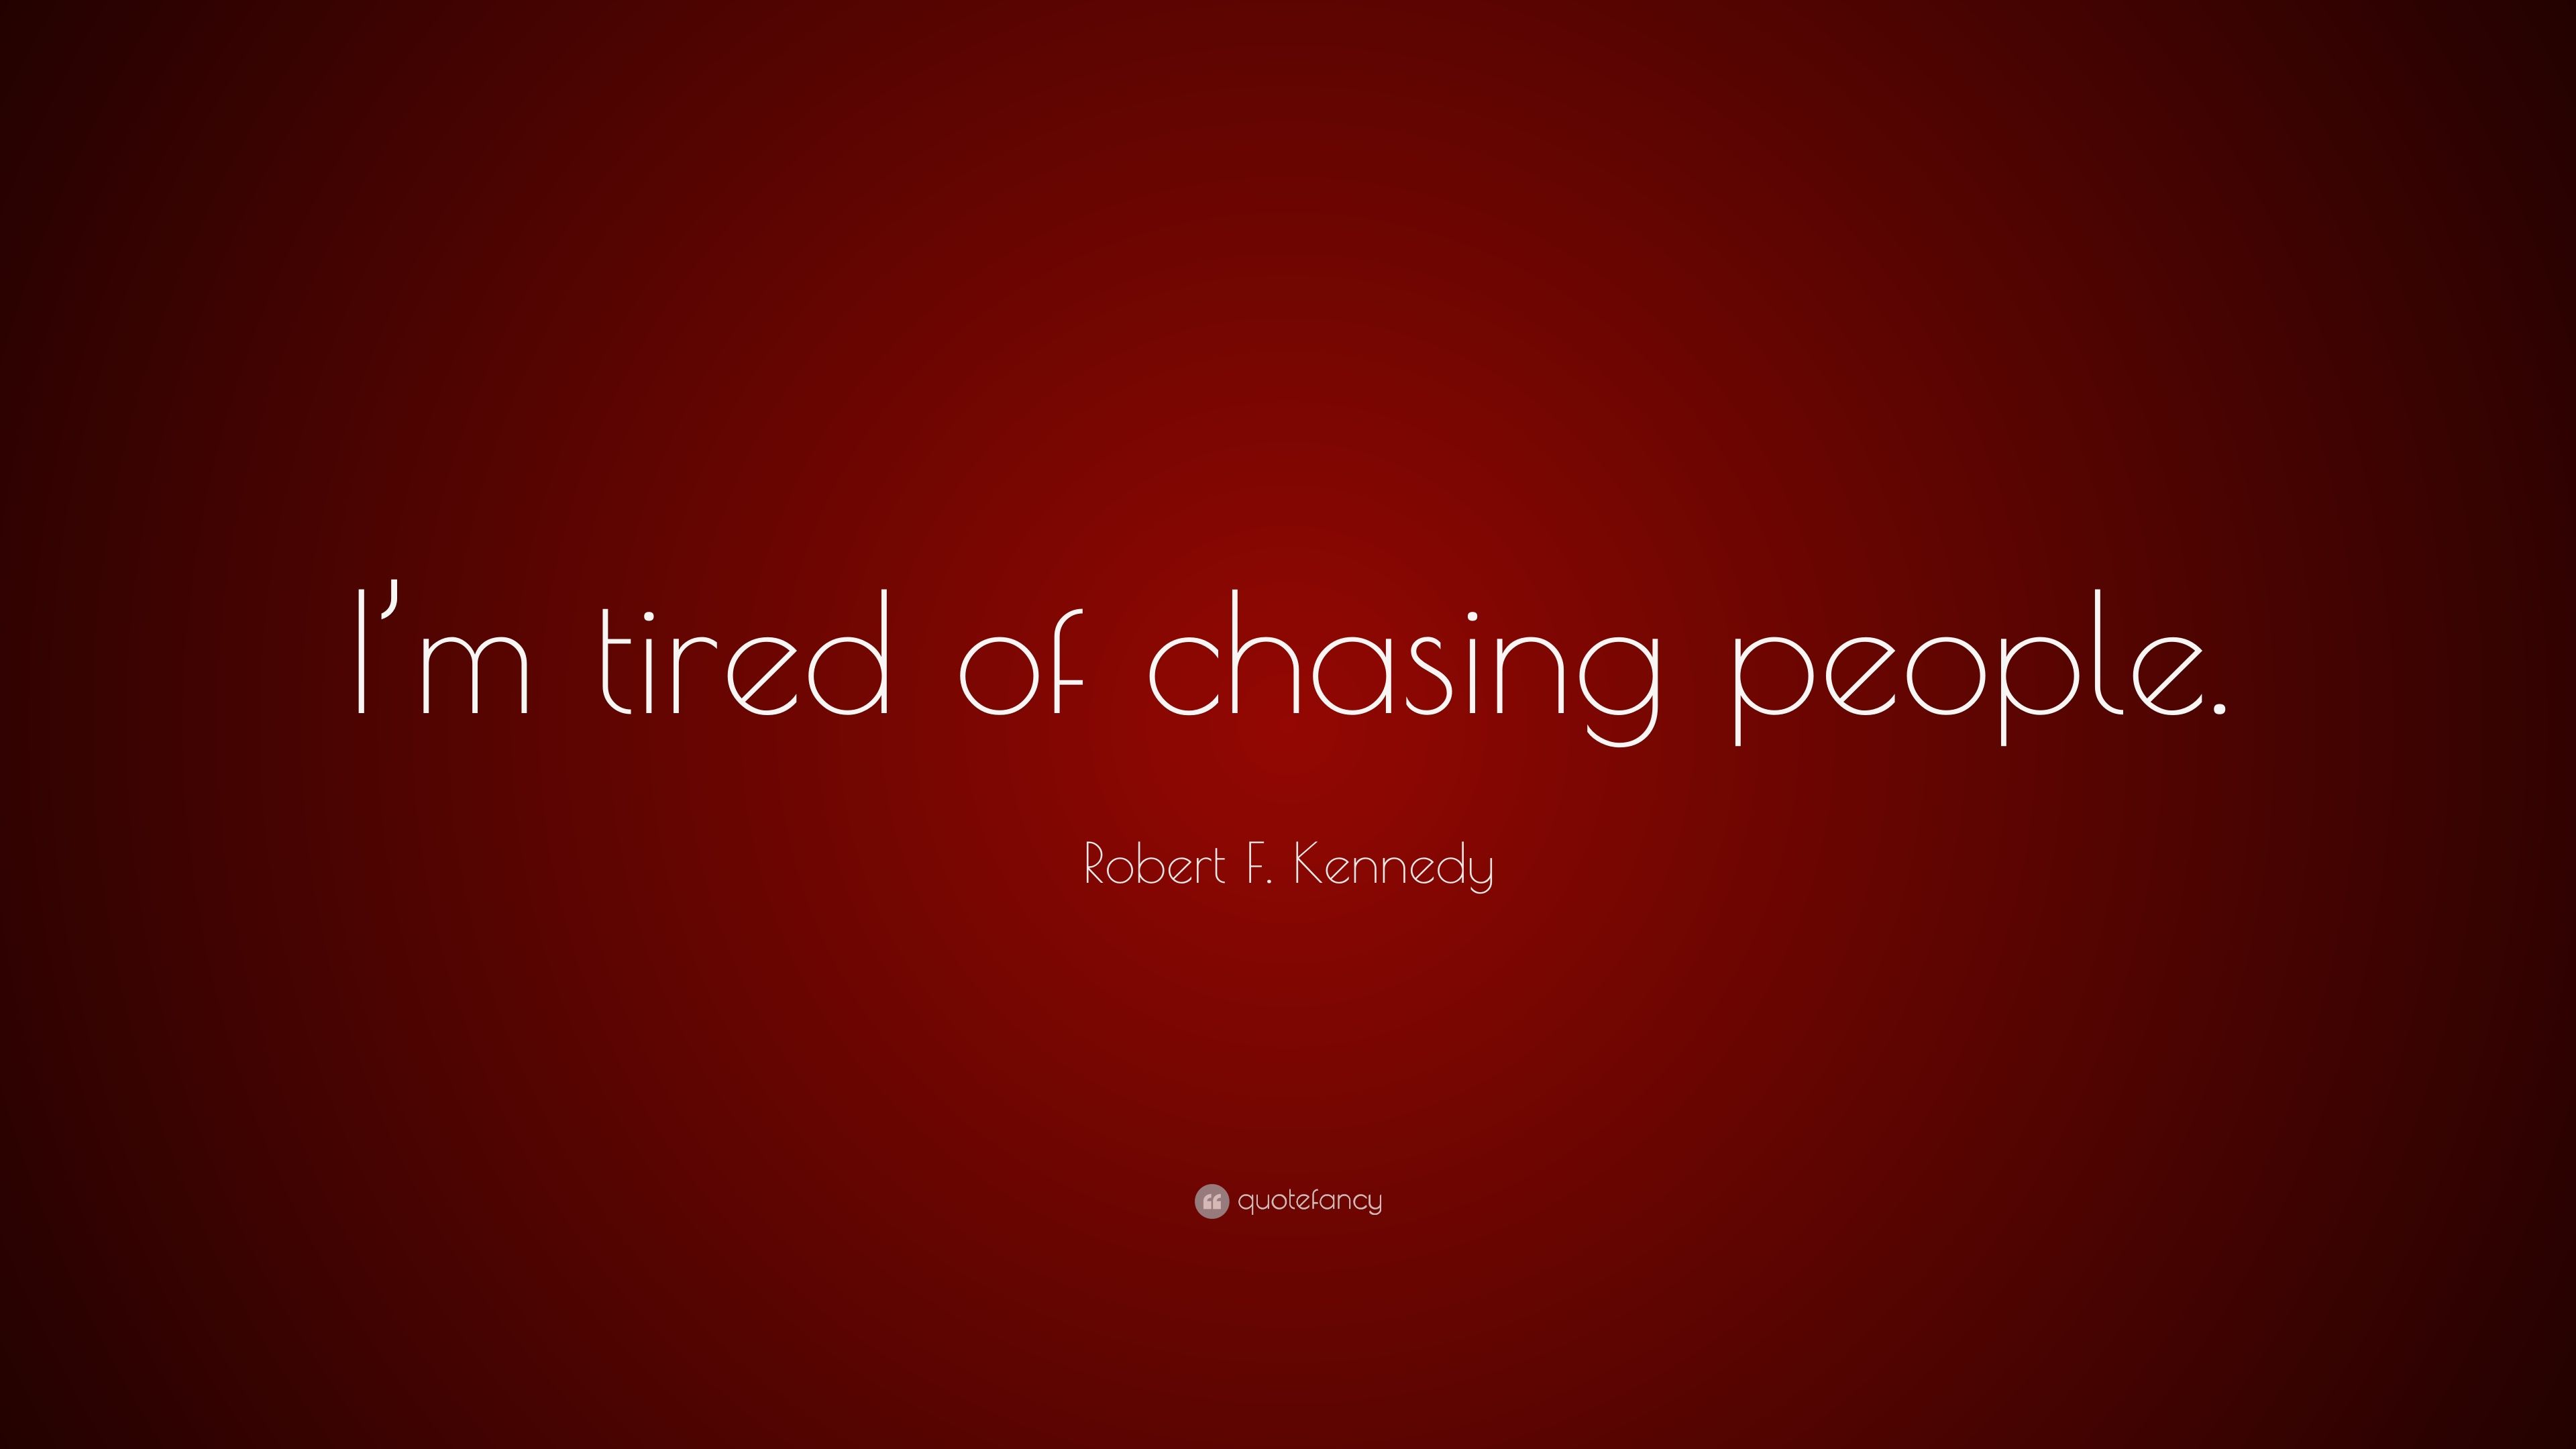 Robert F. Kennedy Quote: “I'm tired of chasing people.” 9